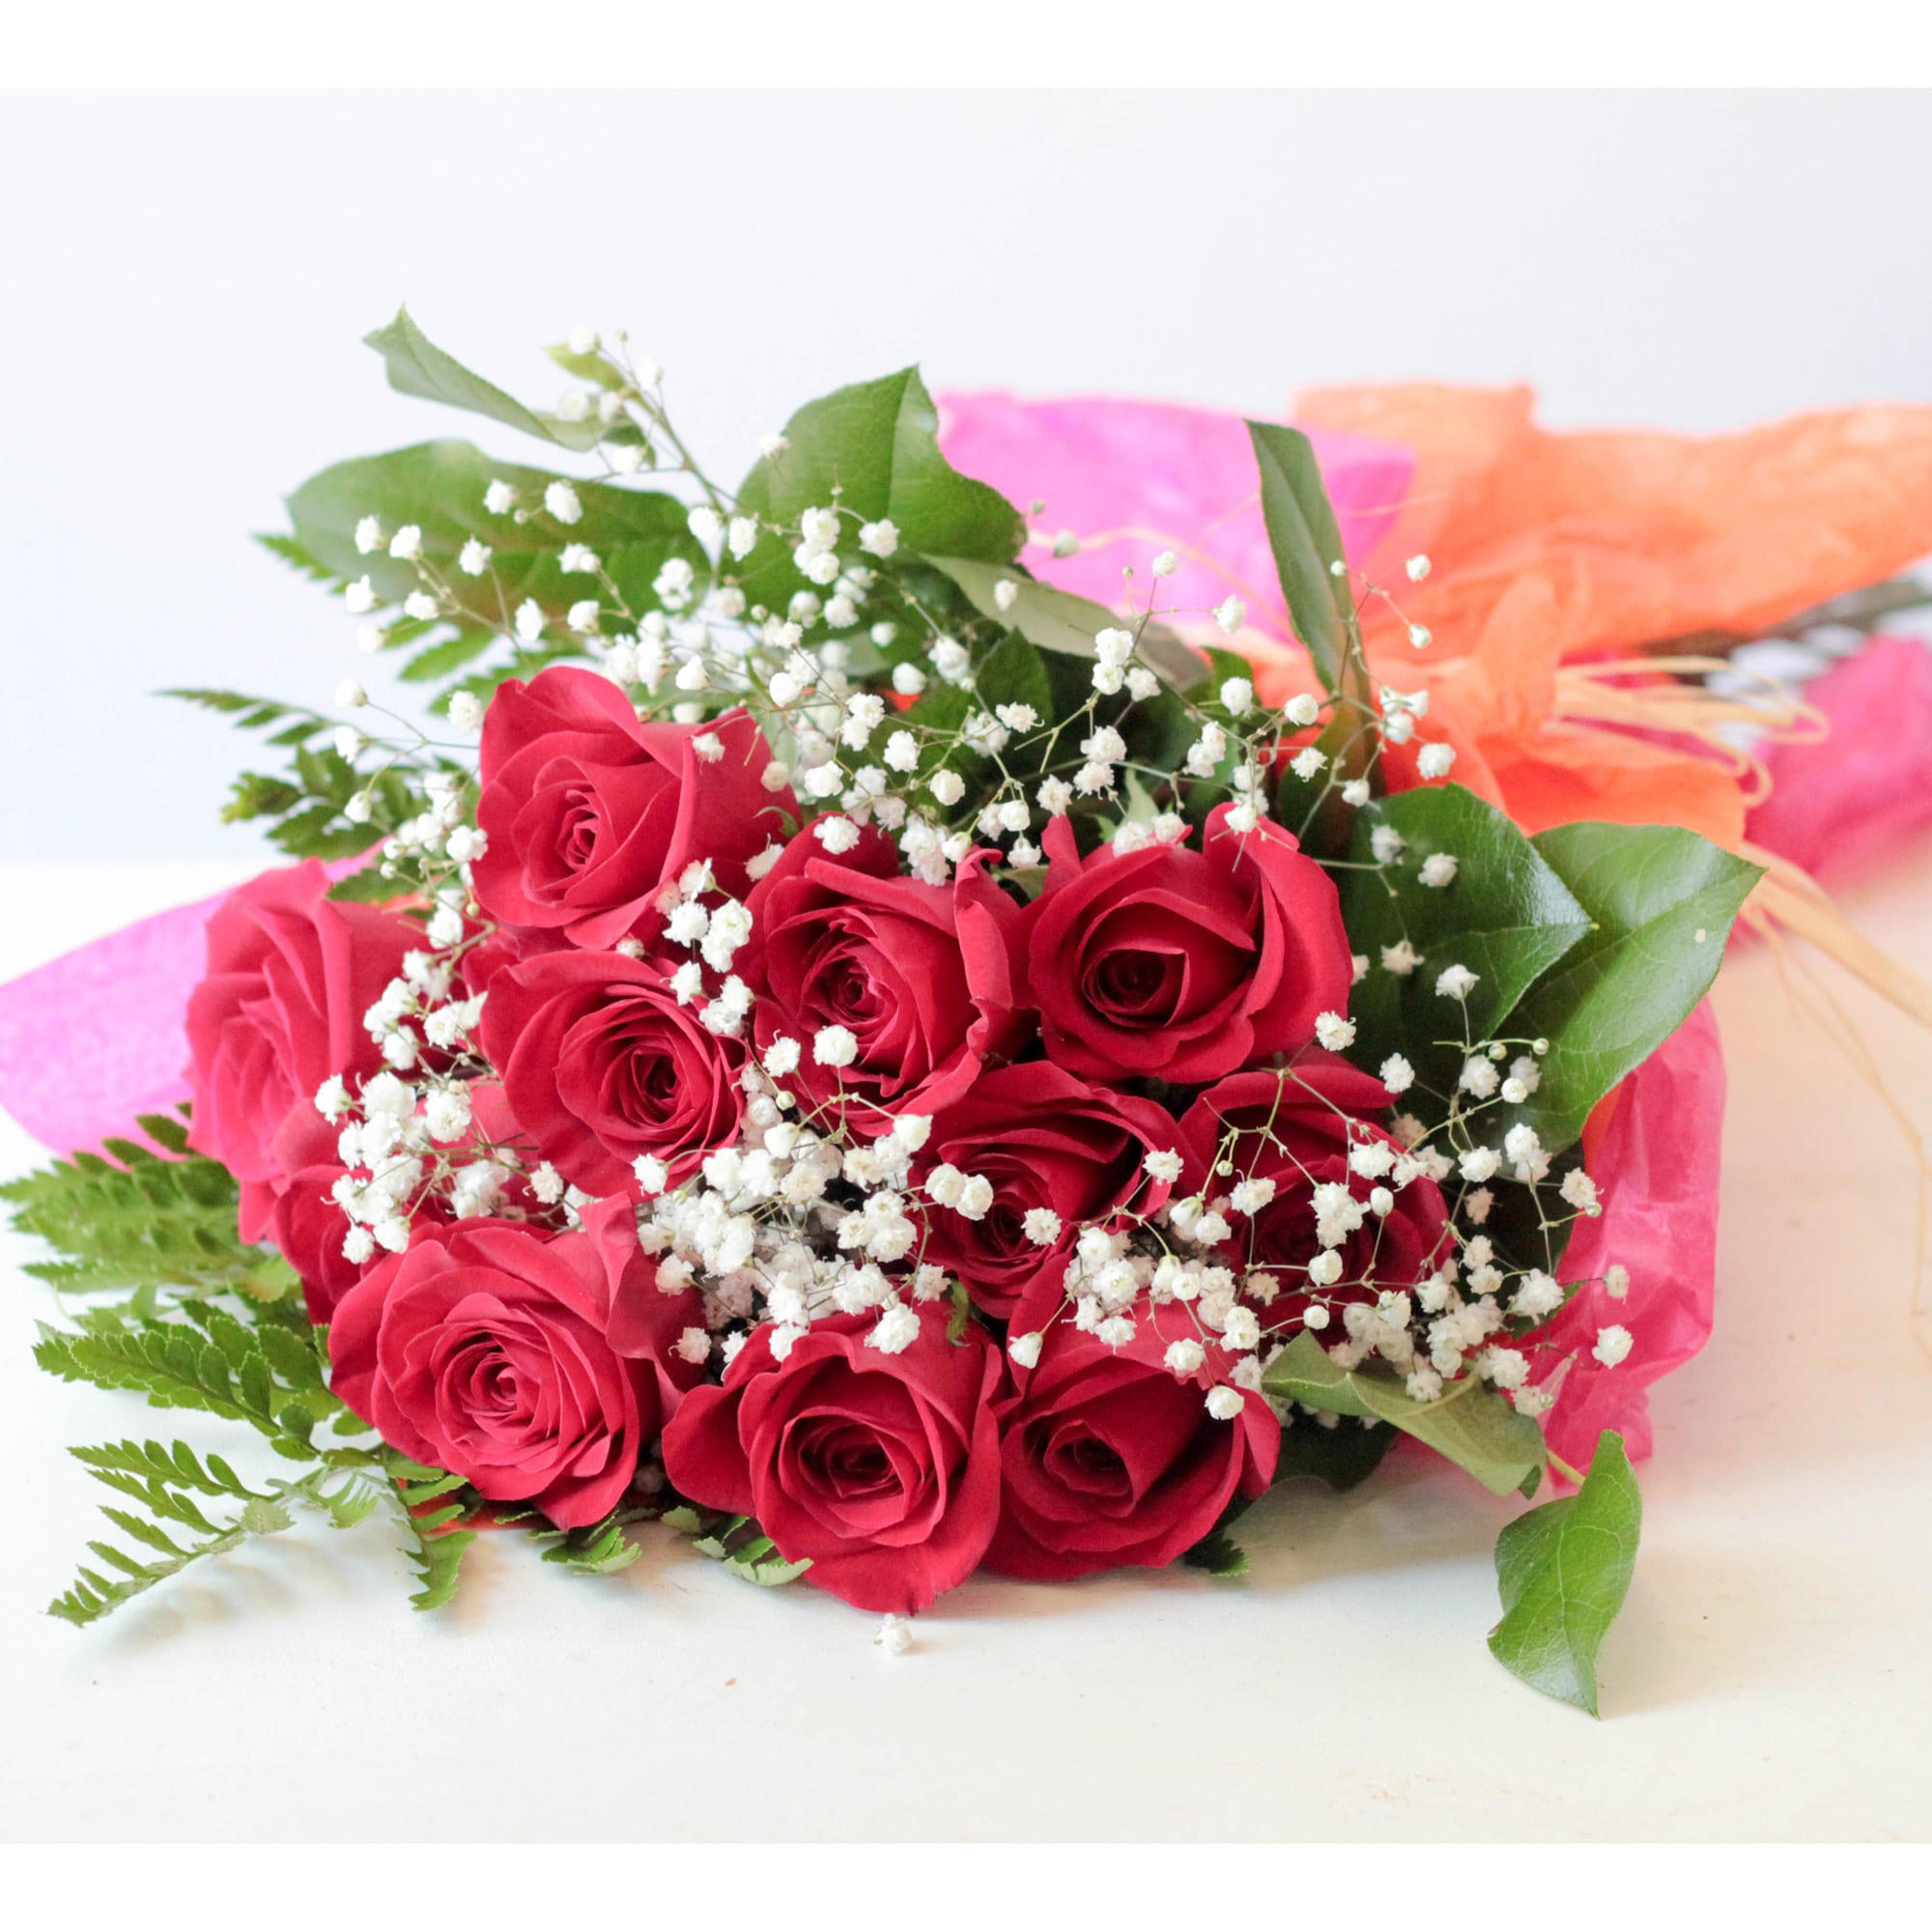 Wrapped Dozen Roses with Babies' Breath and Greens - PICK UP ONLY Floral  Arrangement in Austin, TX